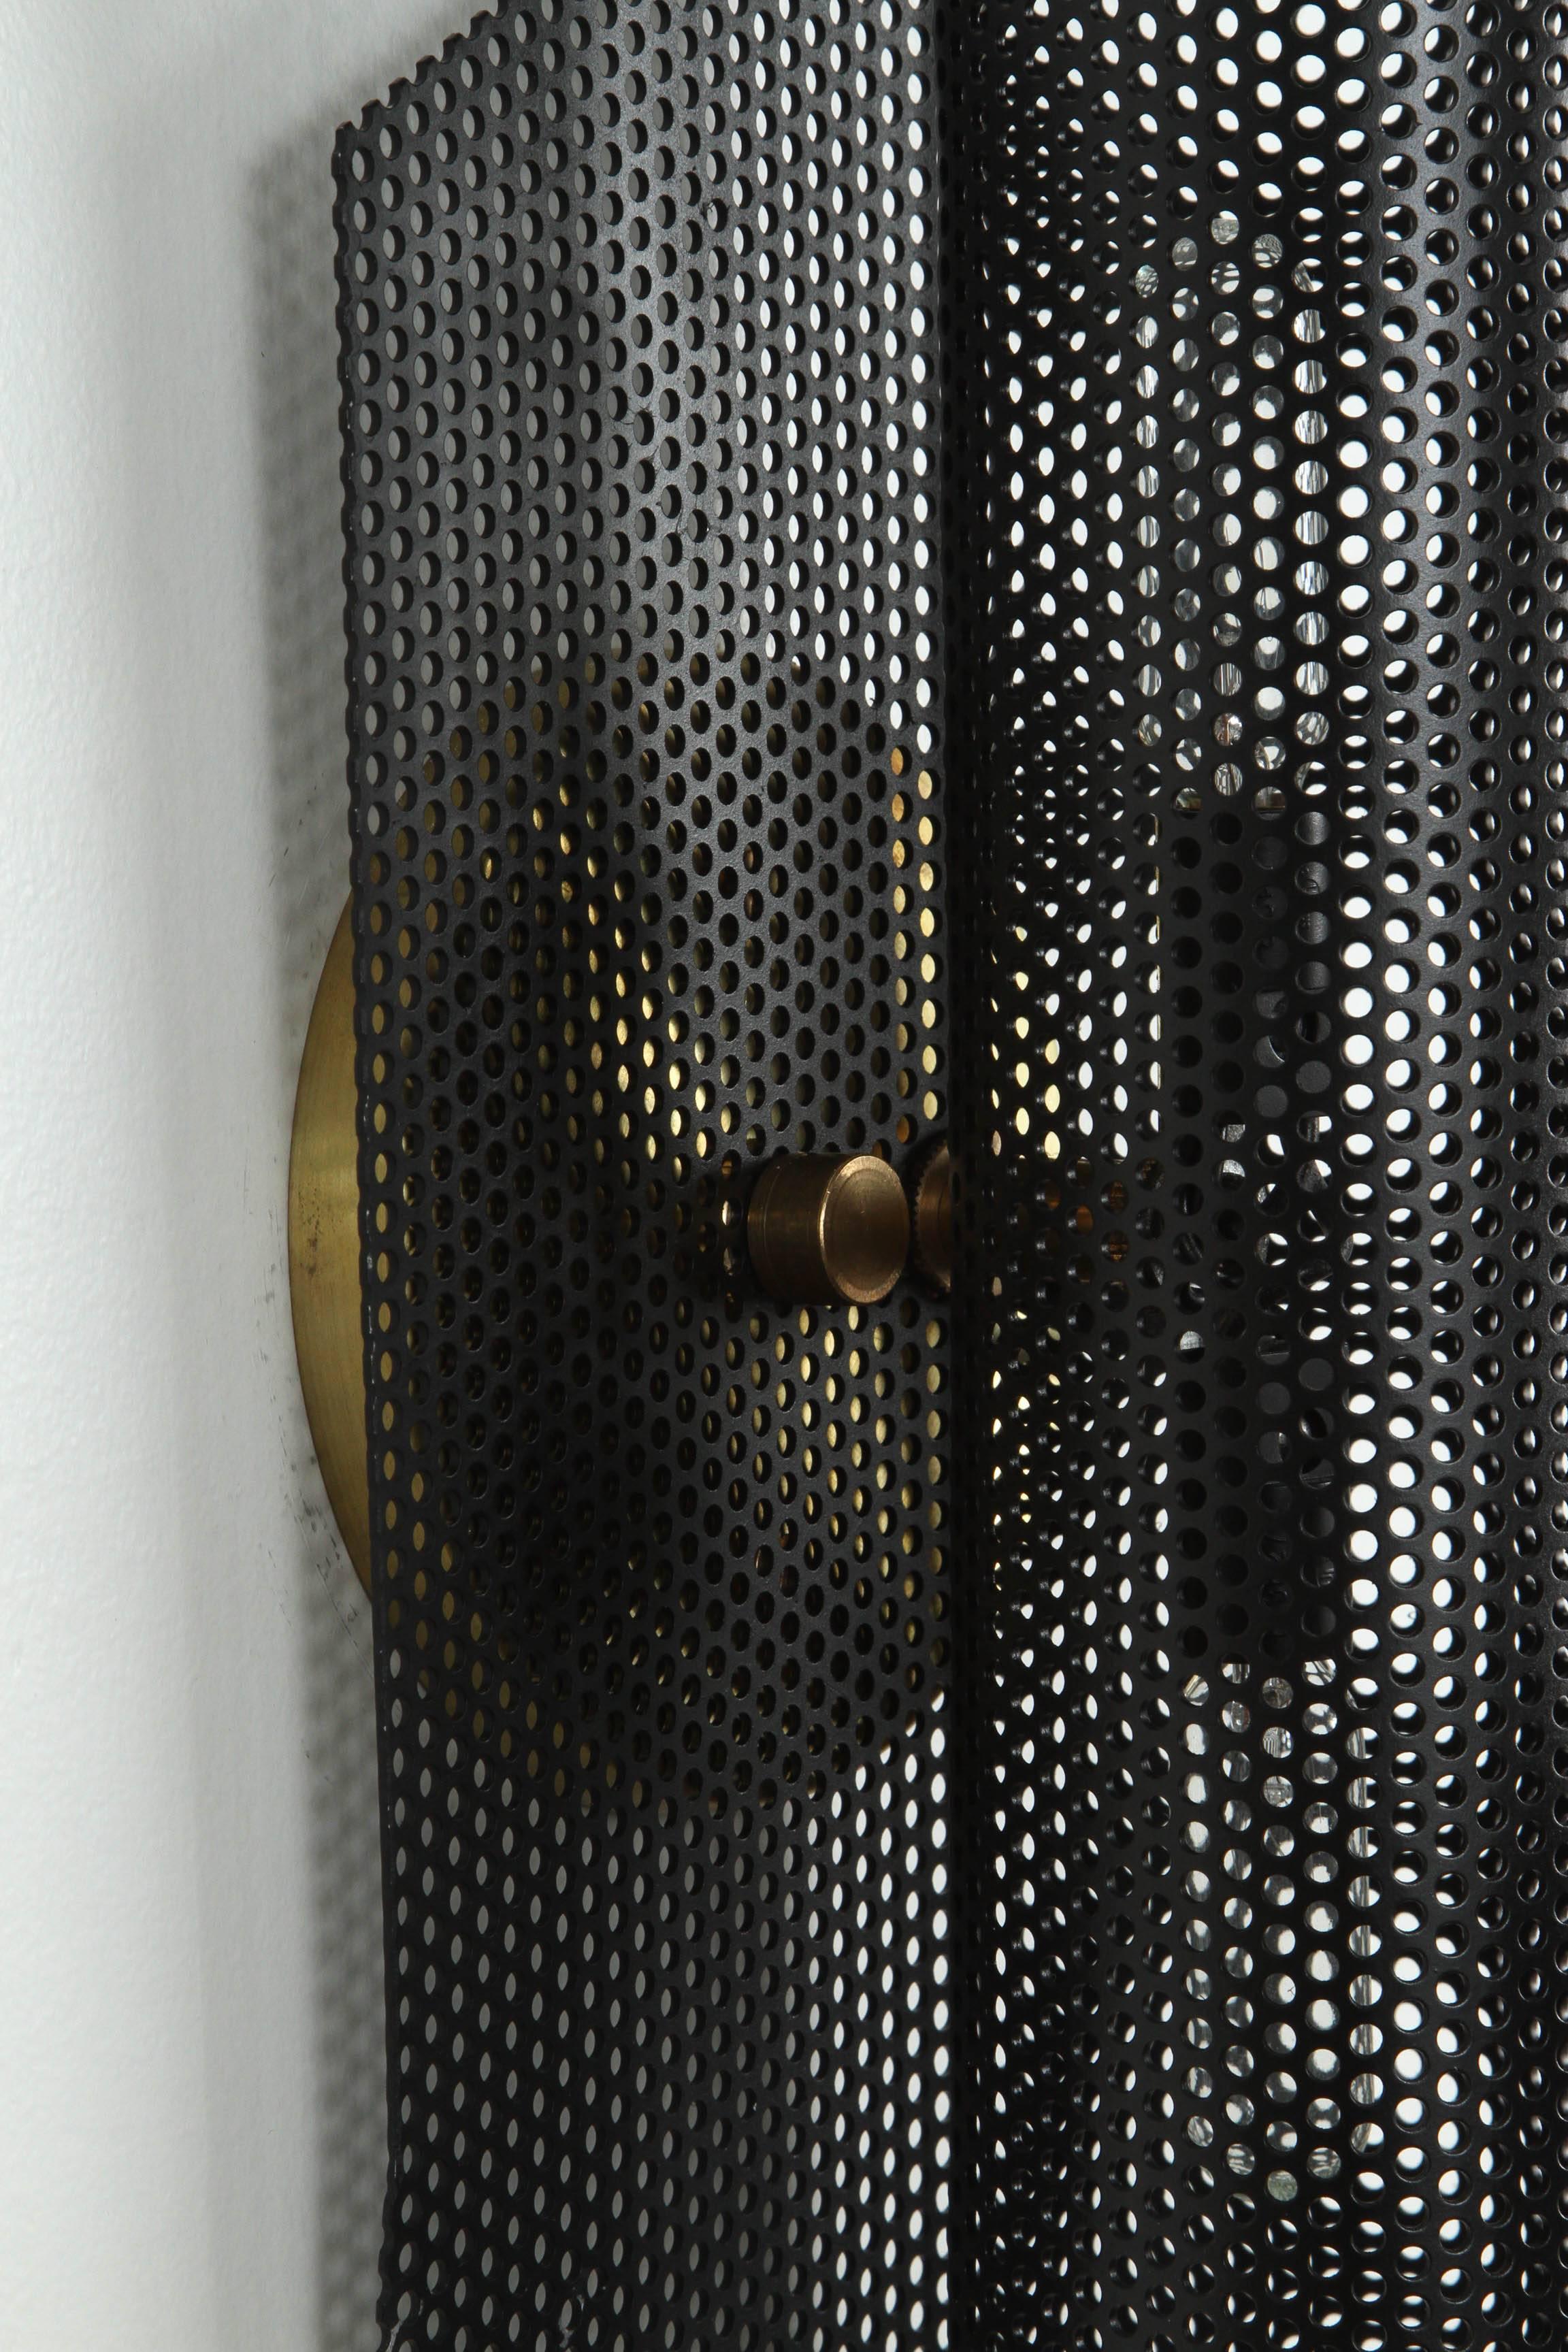 American Rolled Perforated Sconce by Lawson-Fenning